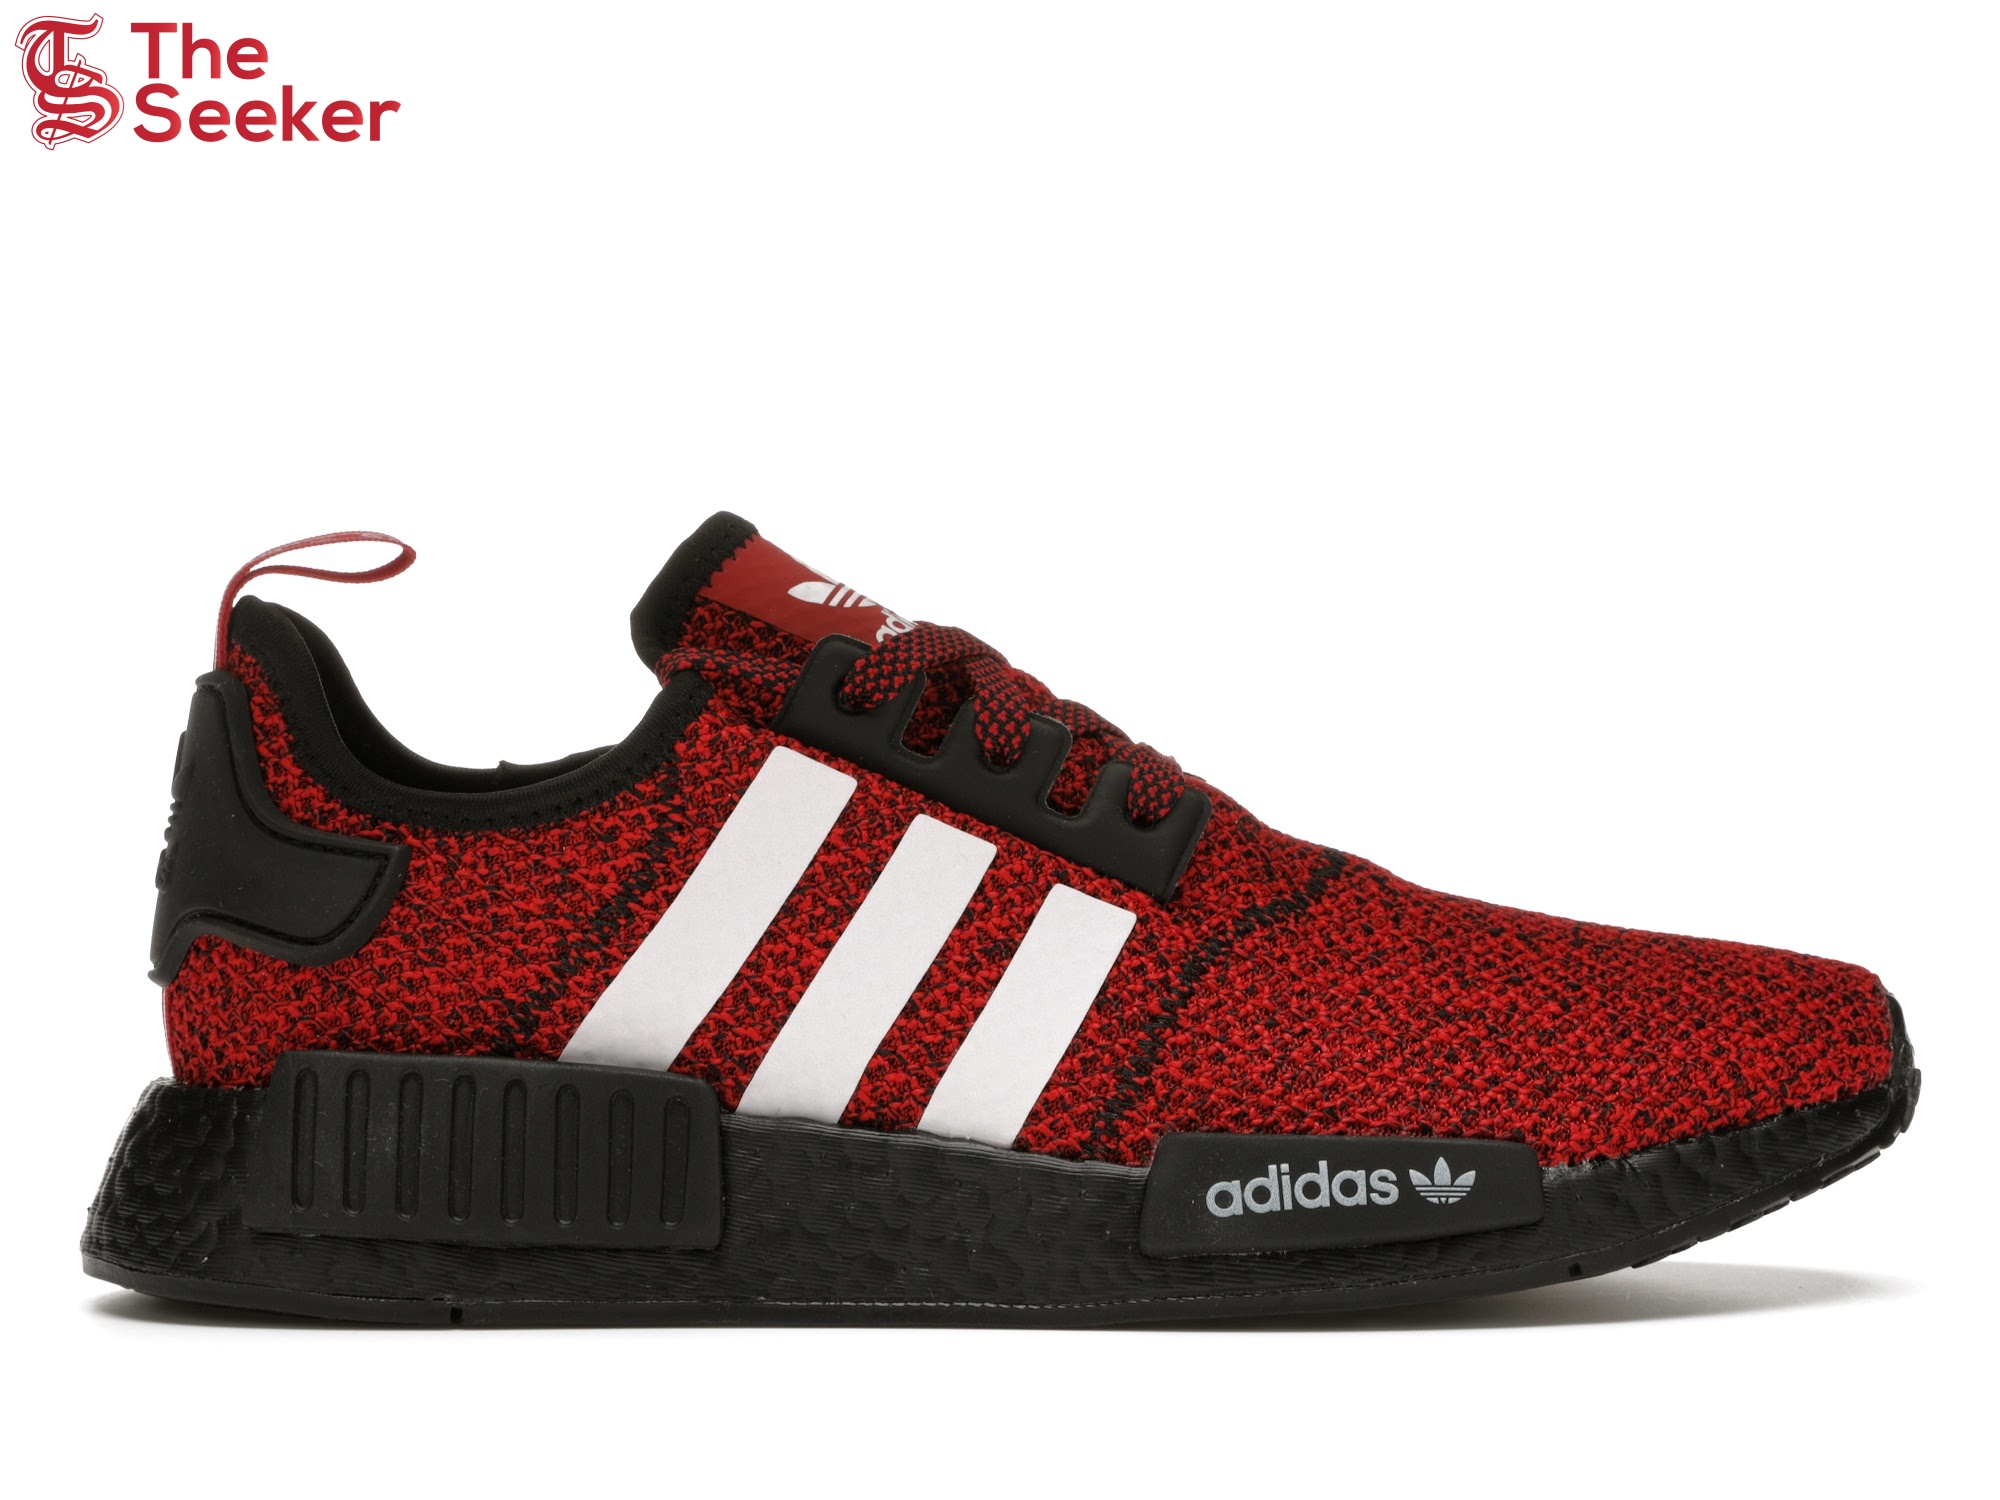 adidas NMD R1 Carbon Red White Black